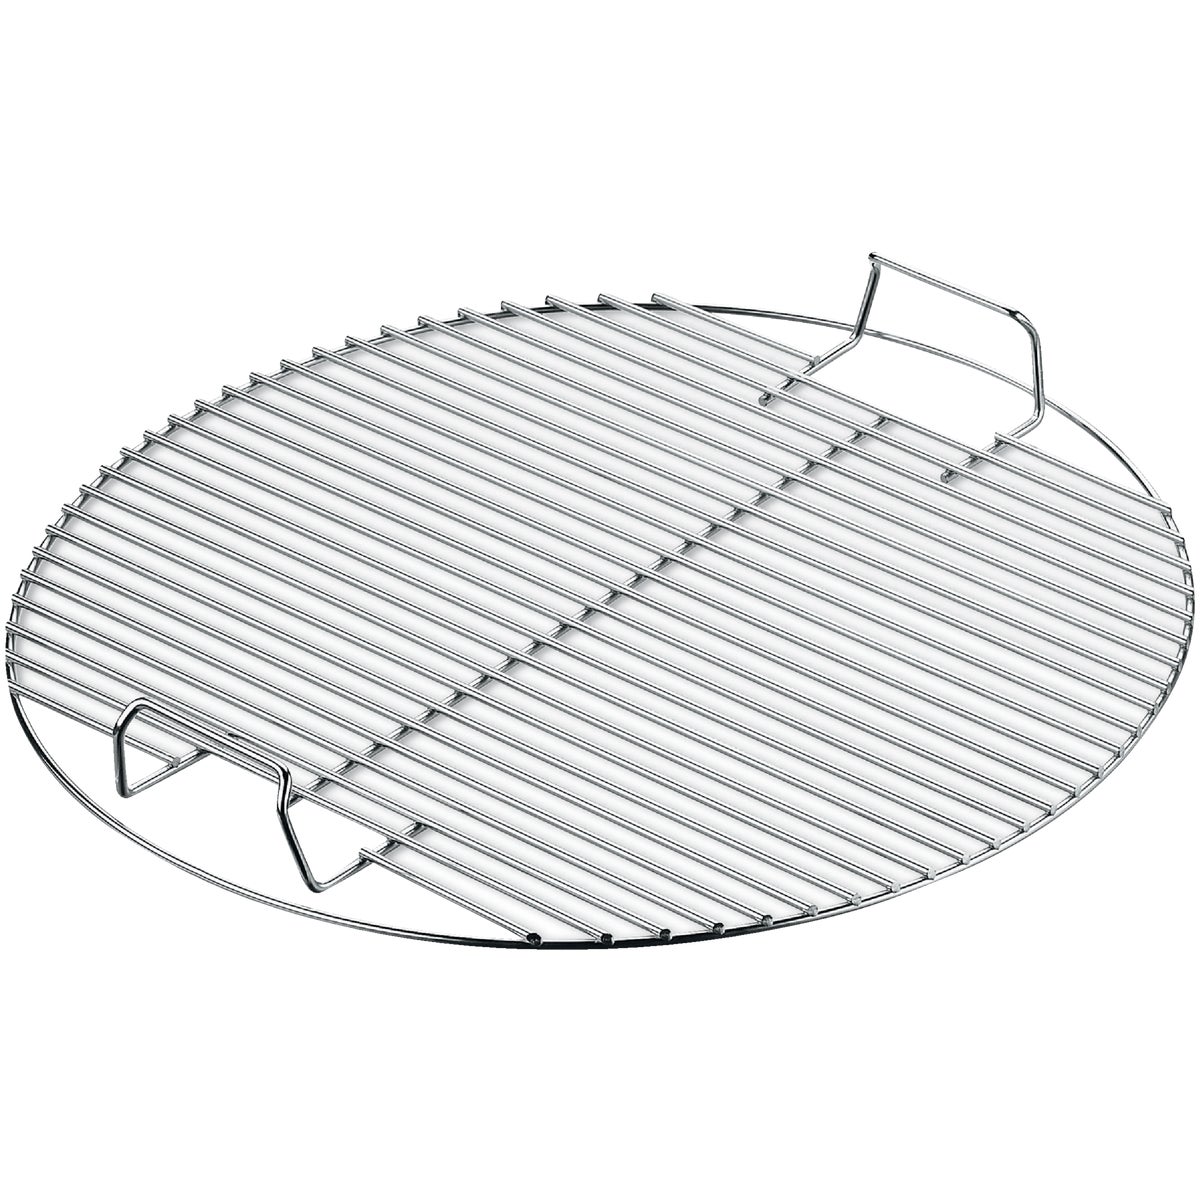 Item 808335, Charcoal grill replacement cooking grate. For use with 18-1/2 In.